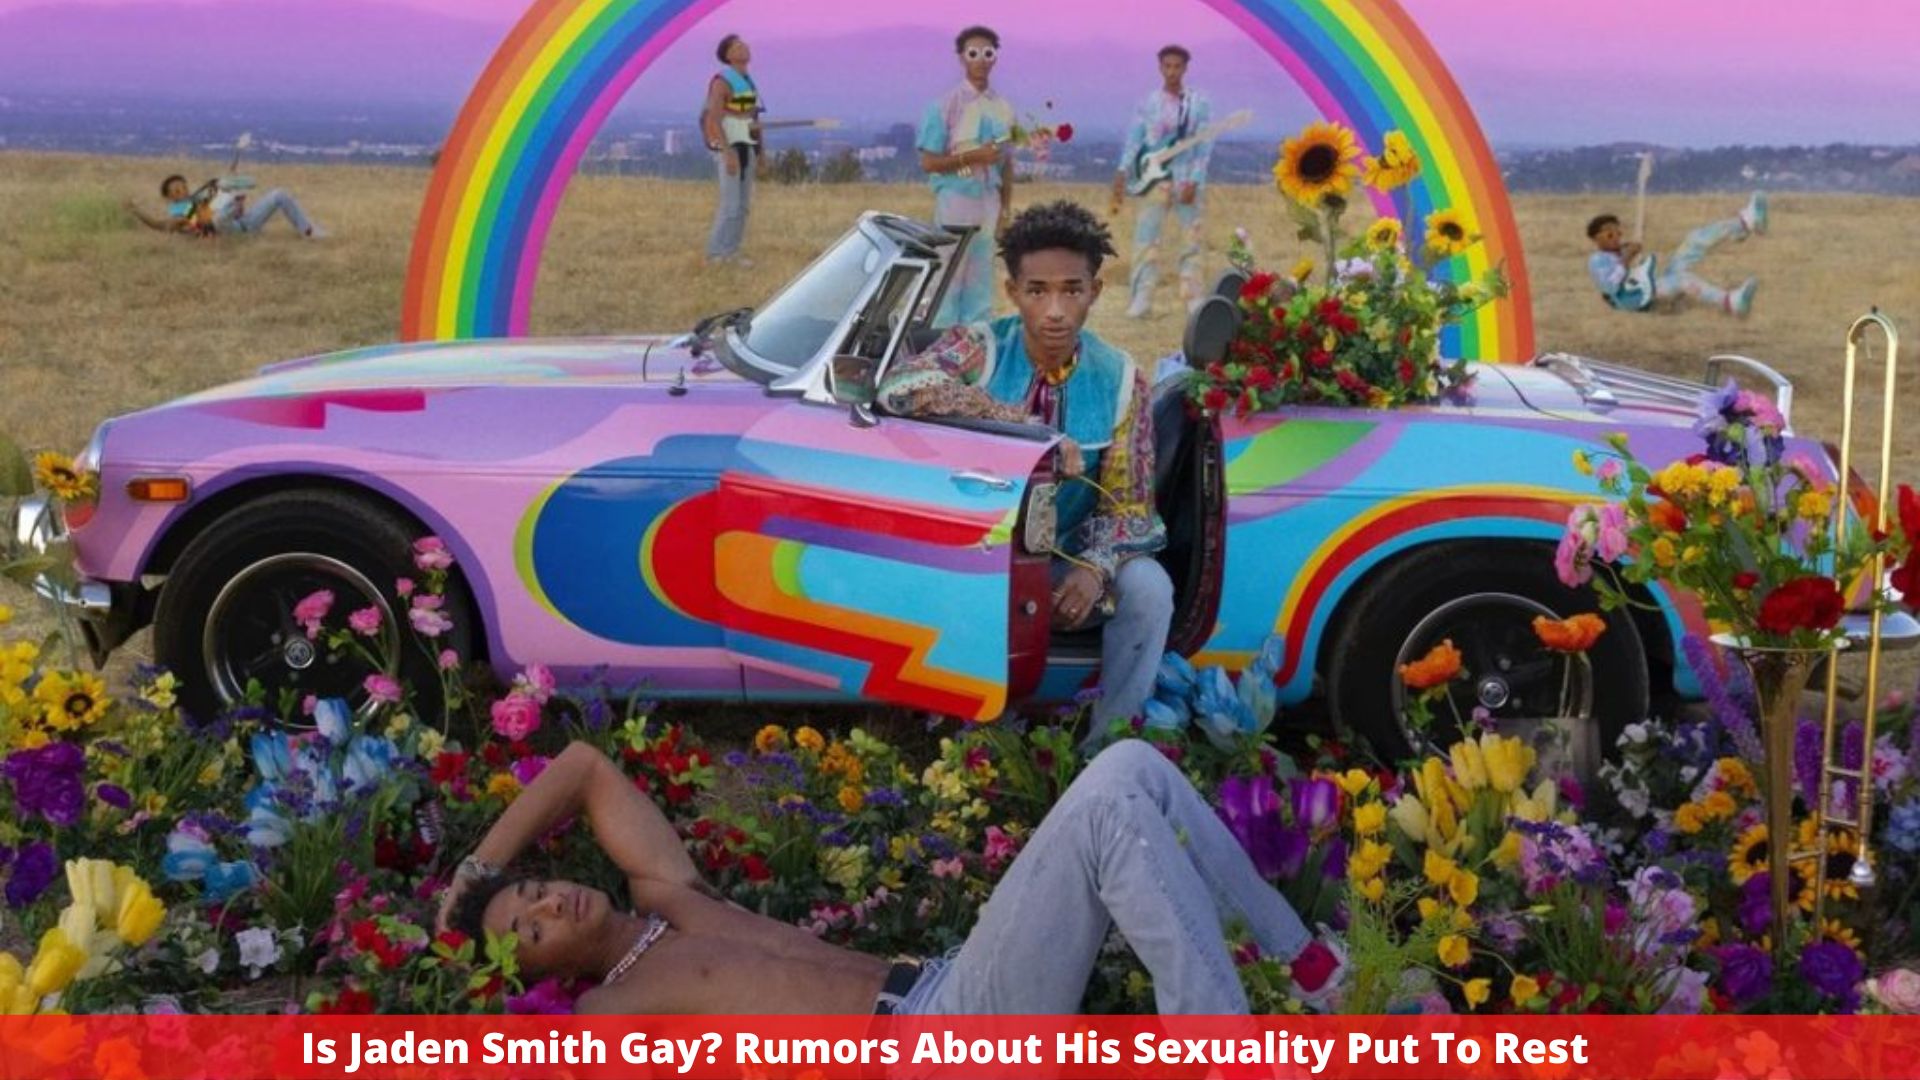 Is Jaden Smith Gay? Rumors About His Sexuality Put To Rest